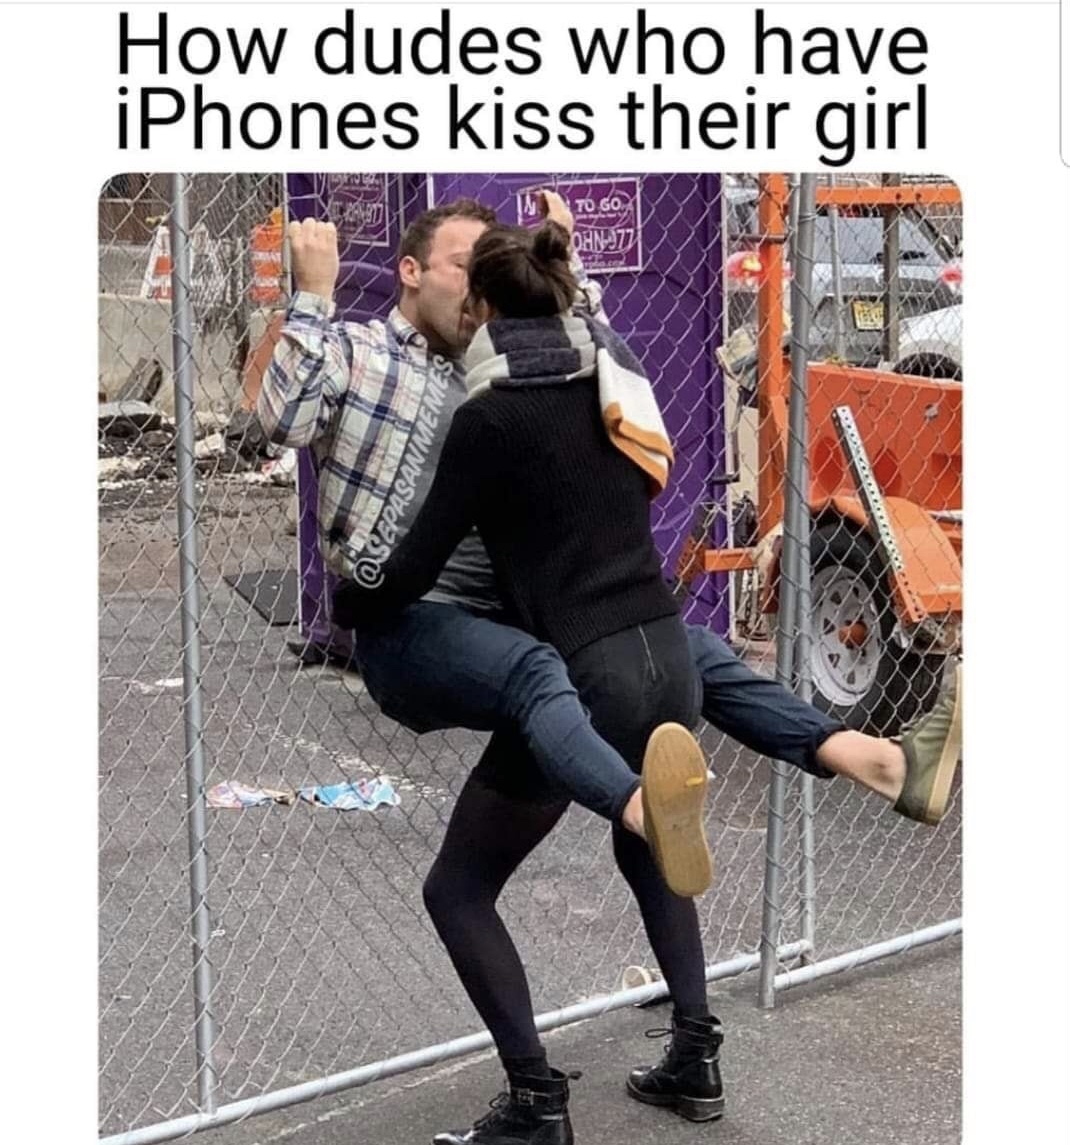 memes - got season 8 episode 5 spoilers without context - How dudes who have iPhones kiss their girl OHN77 Dasan Meme